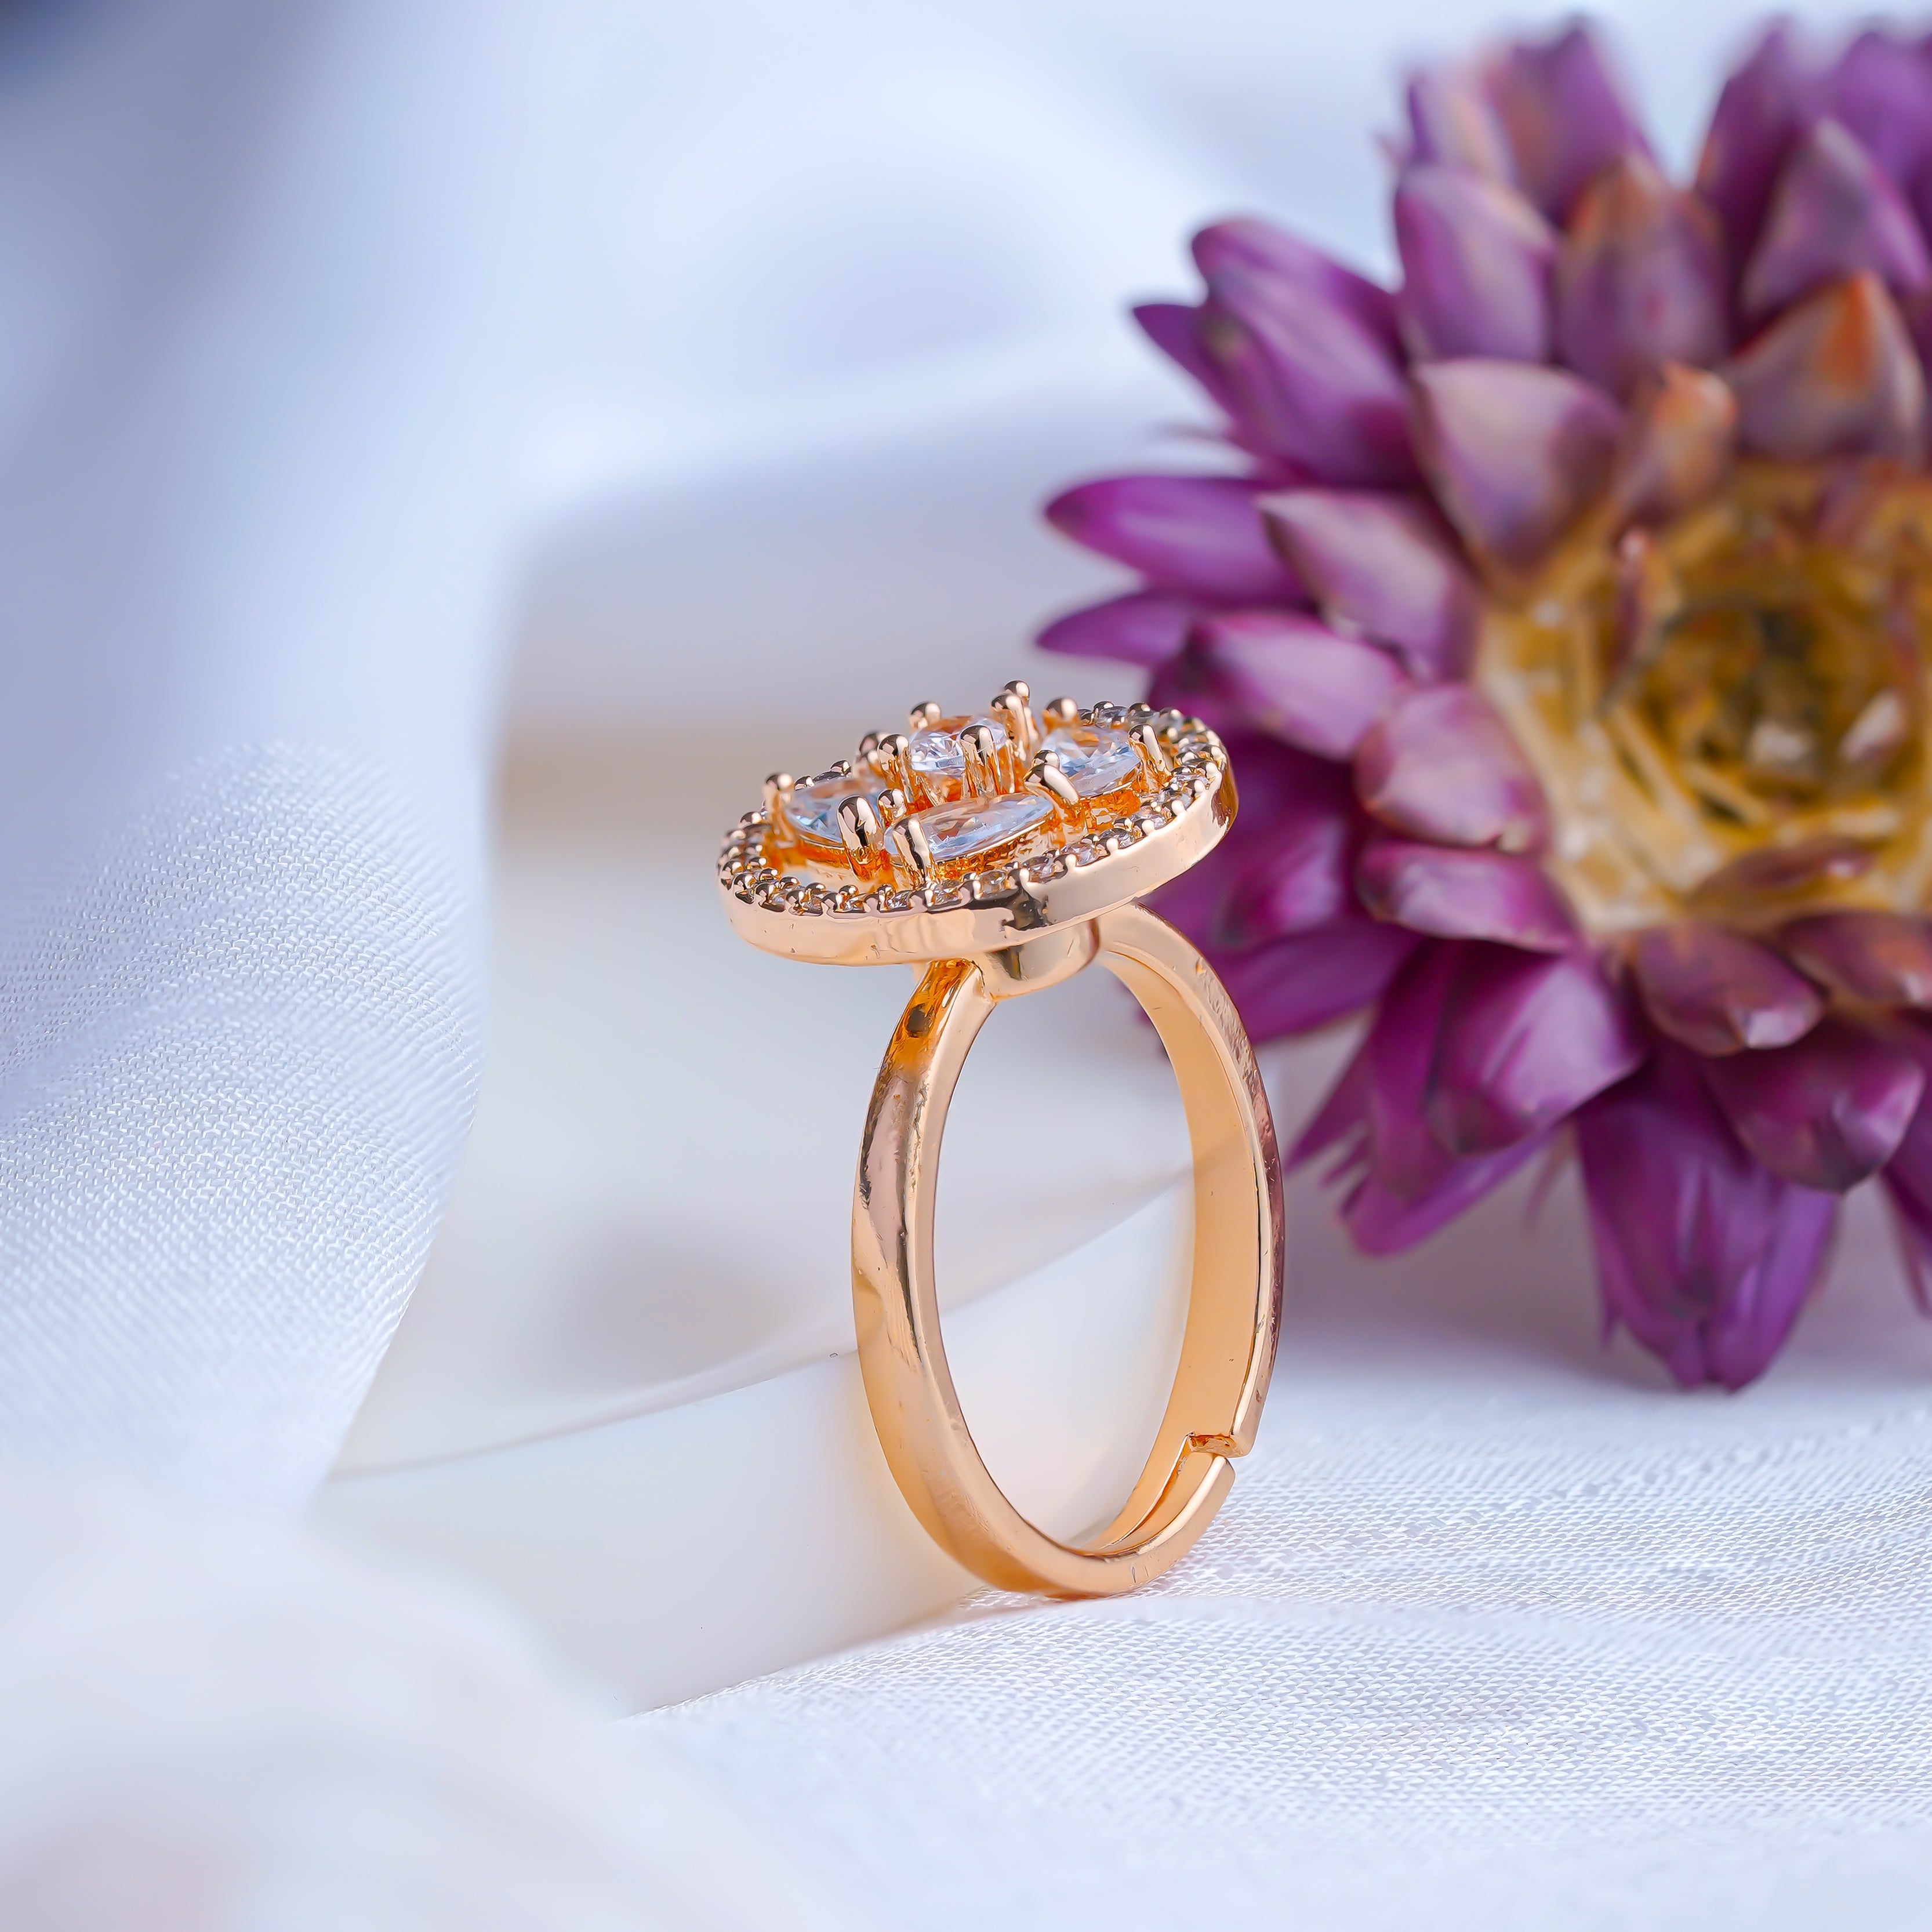 "Jewelsium Majesty: Regal Rings Fit for Royalty"